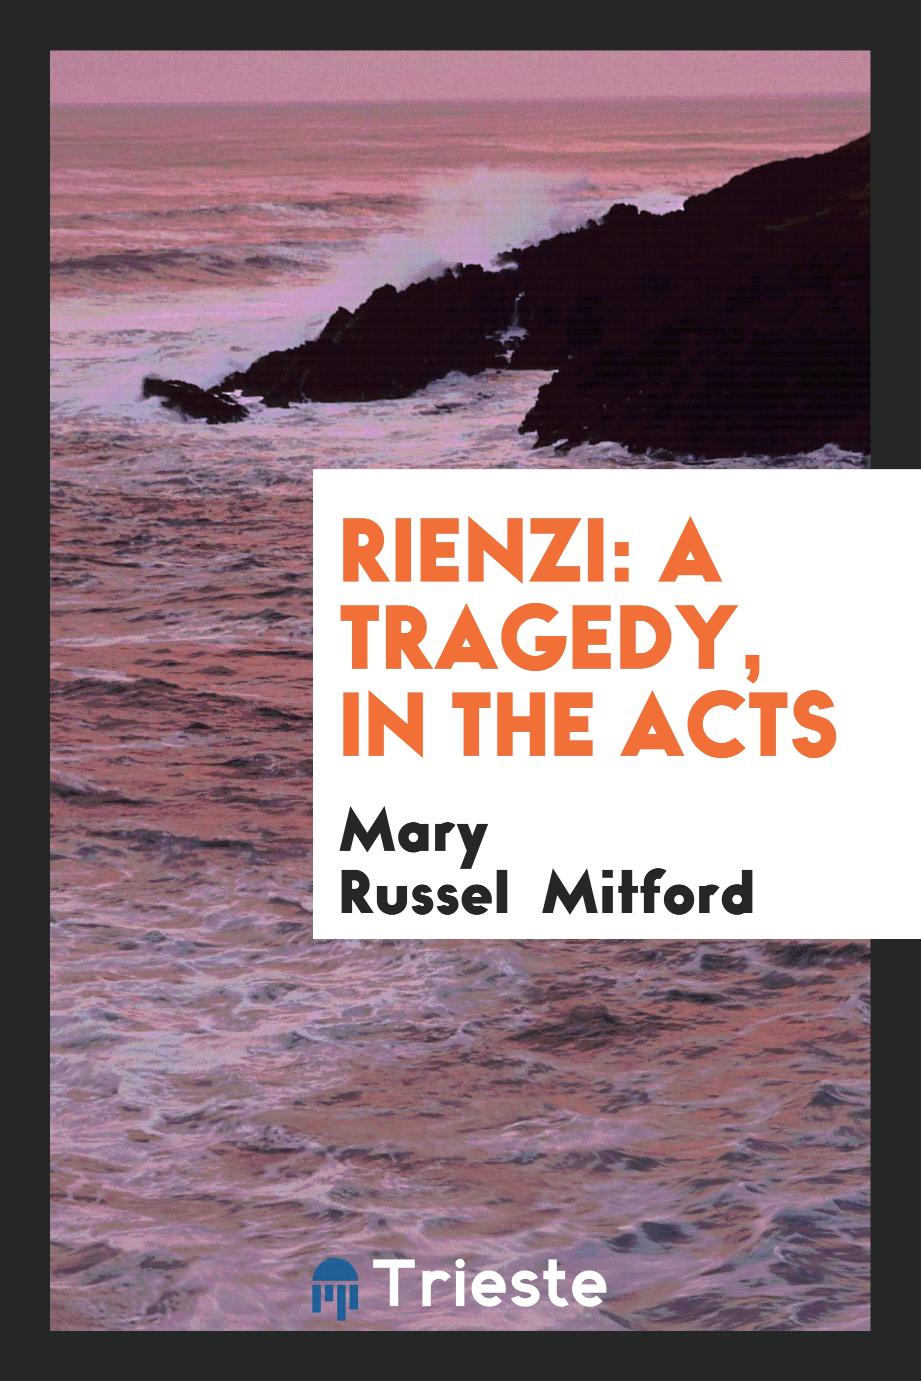 Rienzi: a tragedy, in the acts